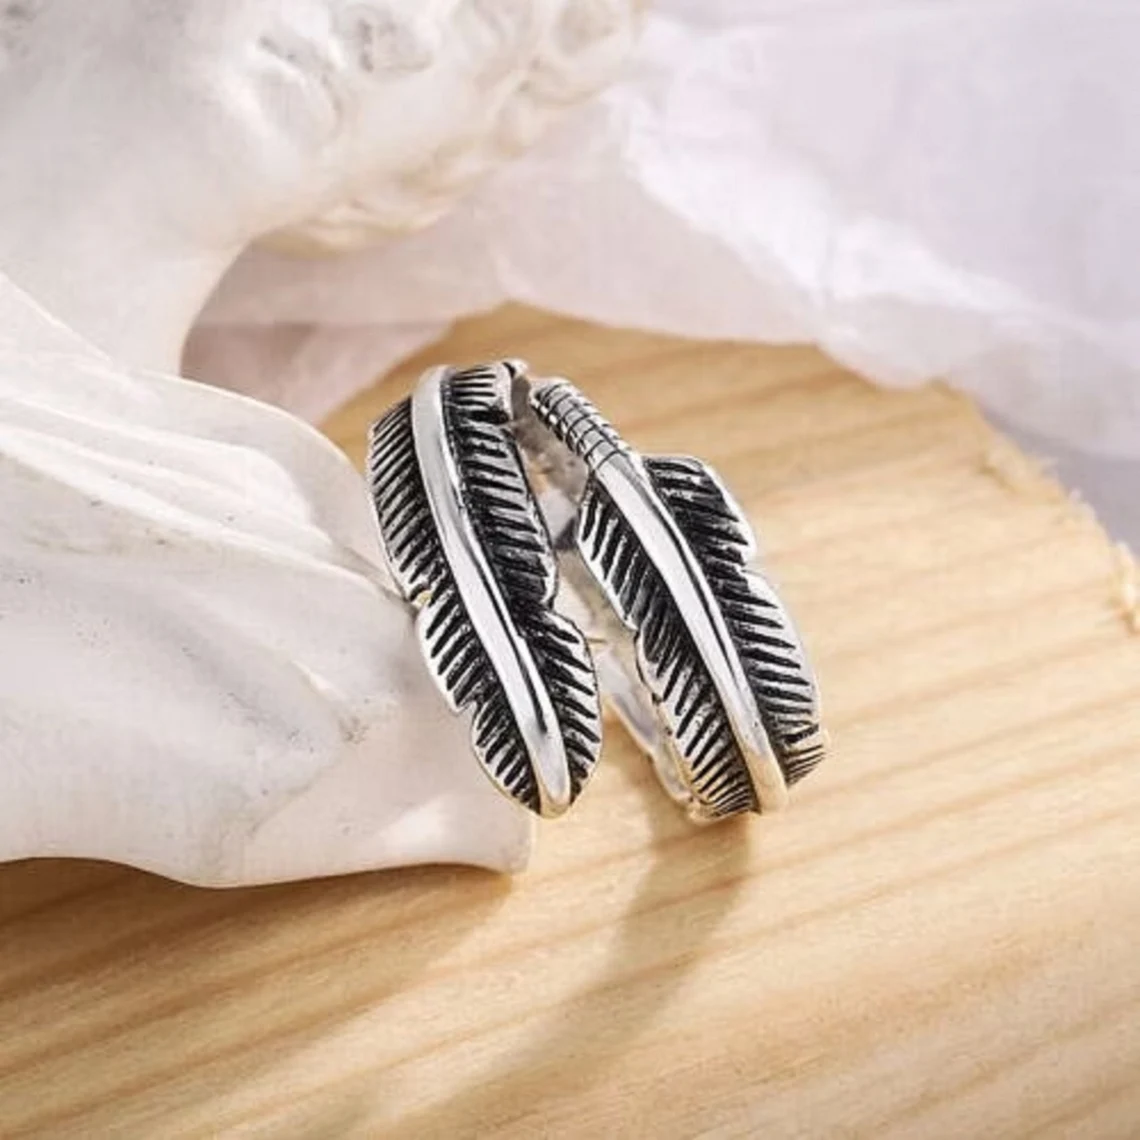 Bamboo Leaf Silver Oxidized Ring | Adjustable |